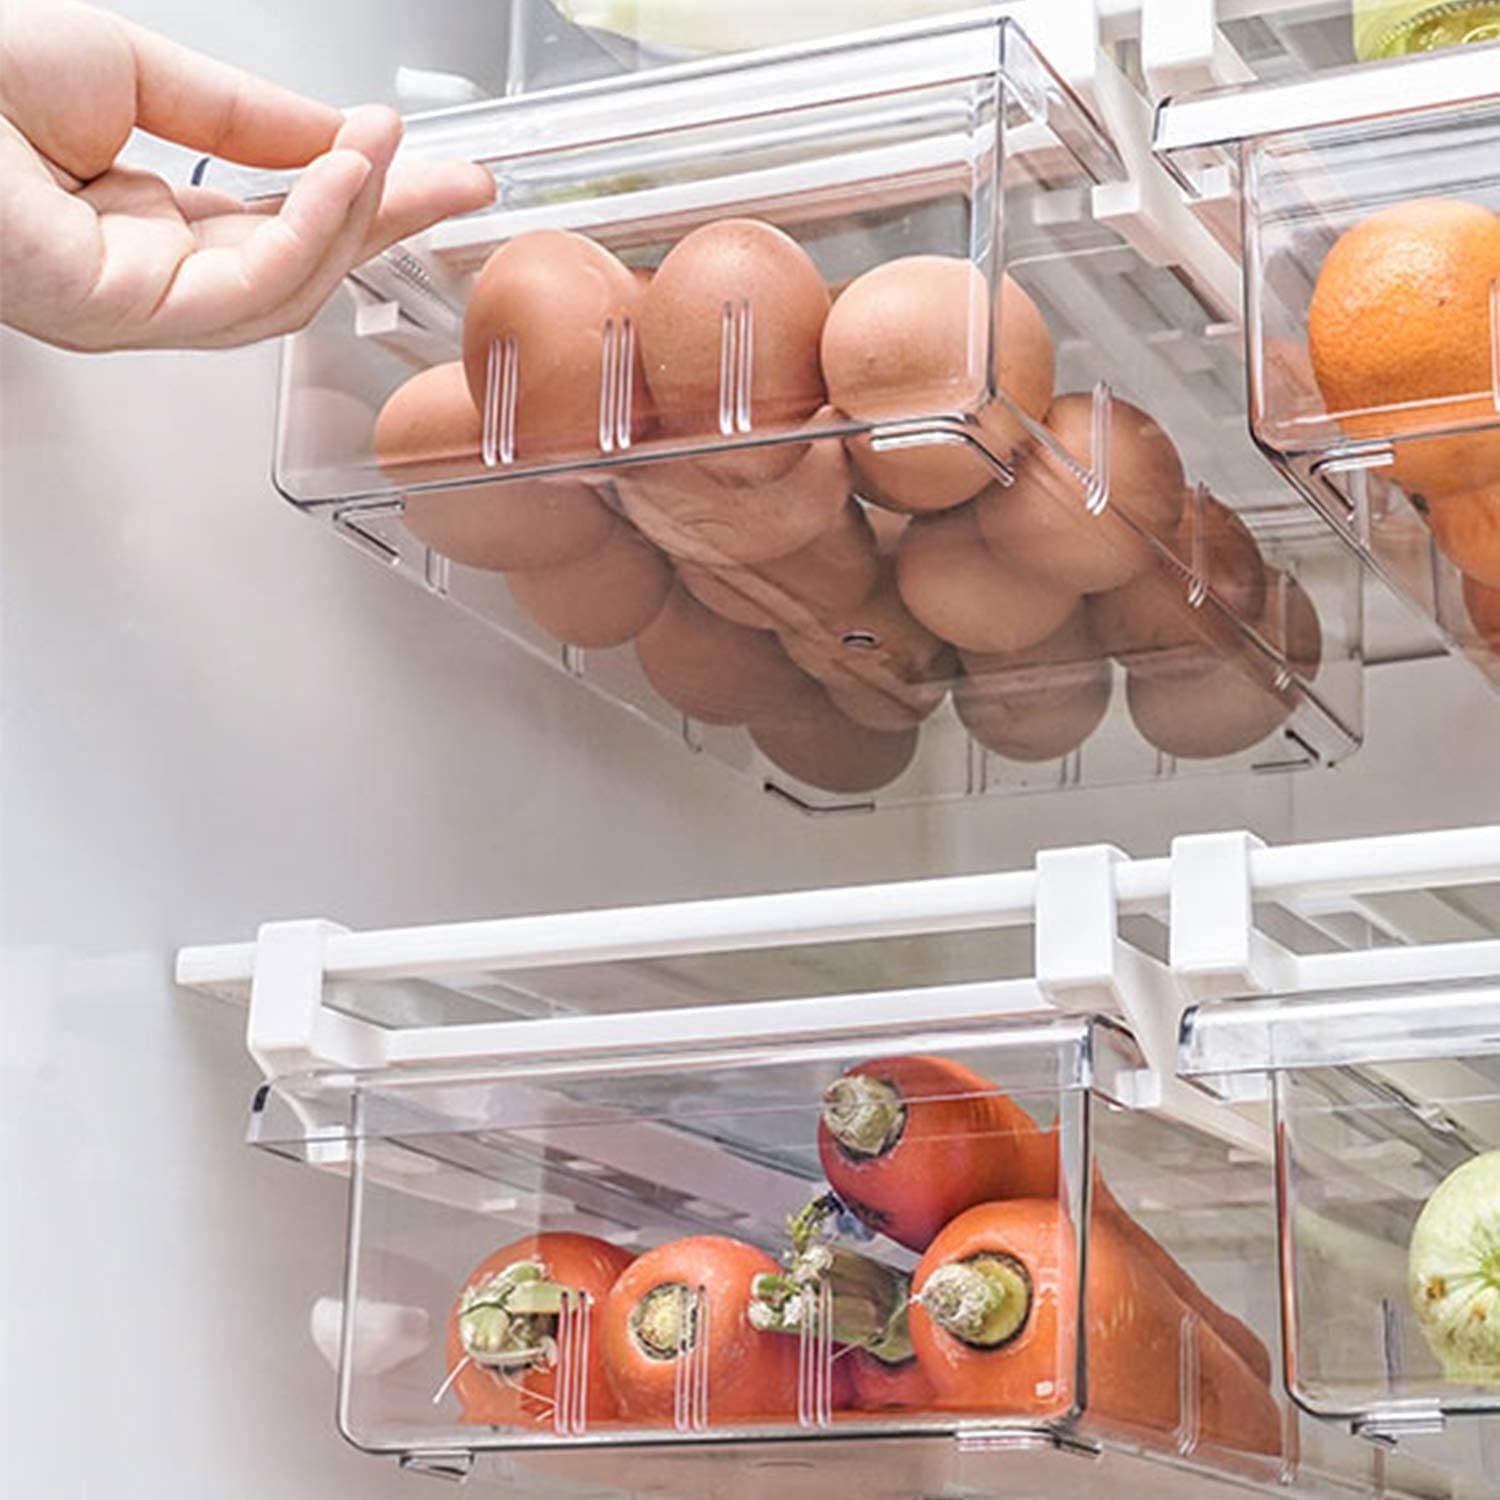 Clear Fridge Organizers To Help You Stop Wasting Food